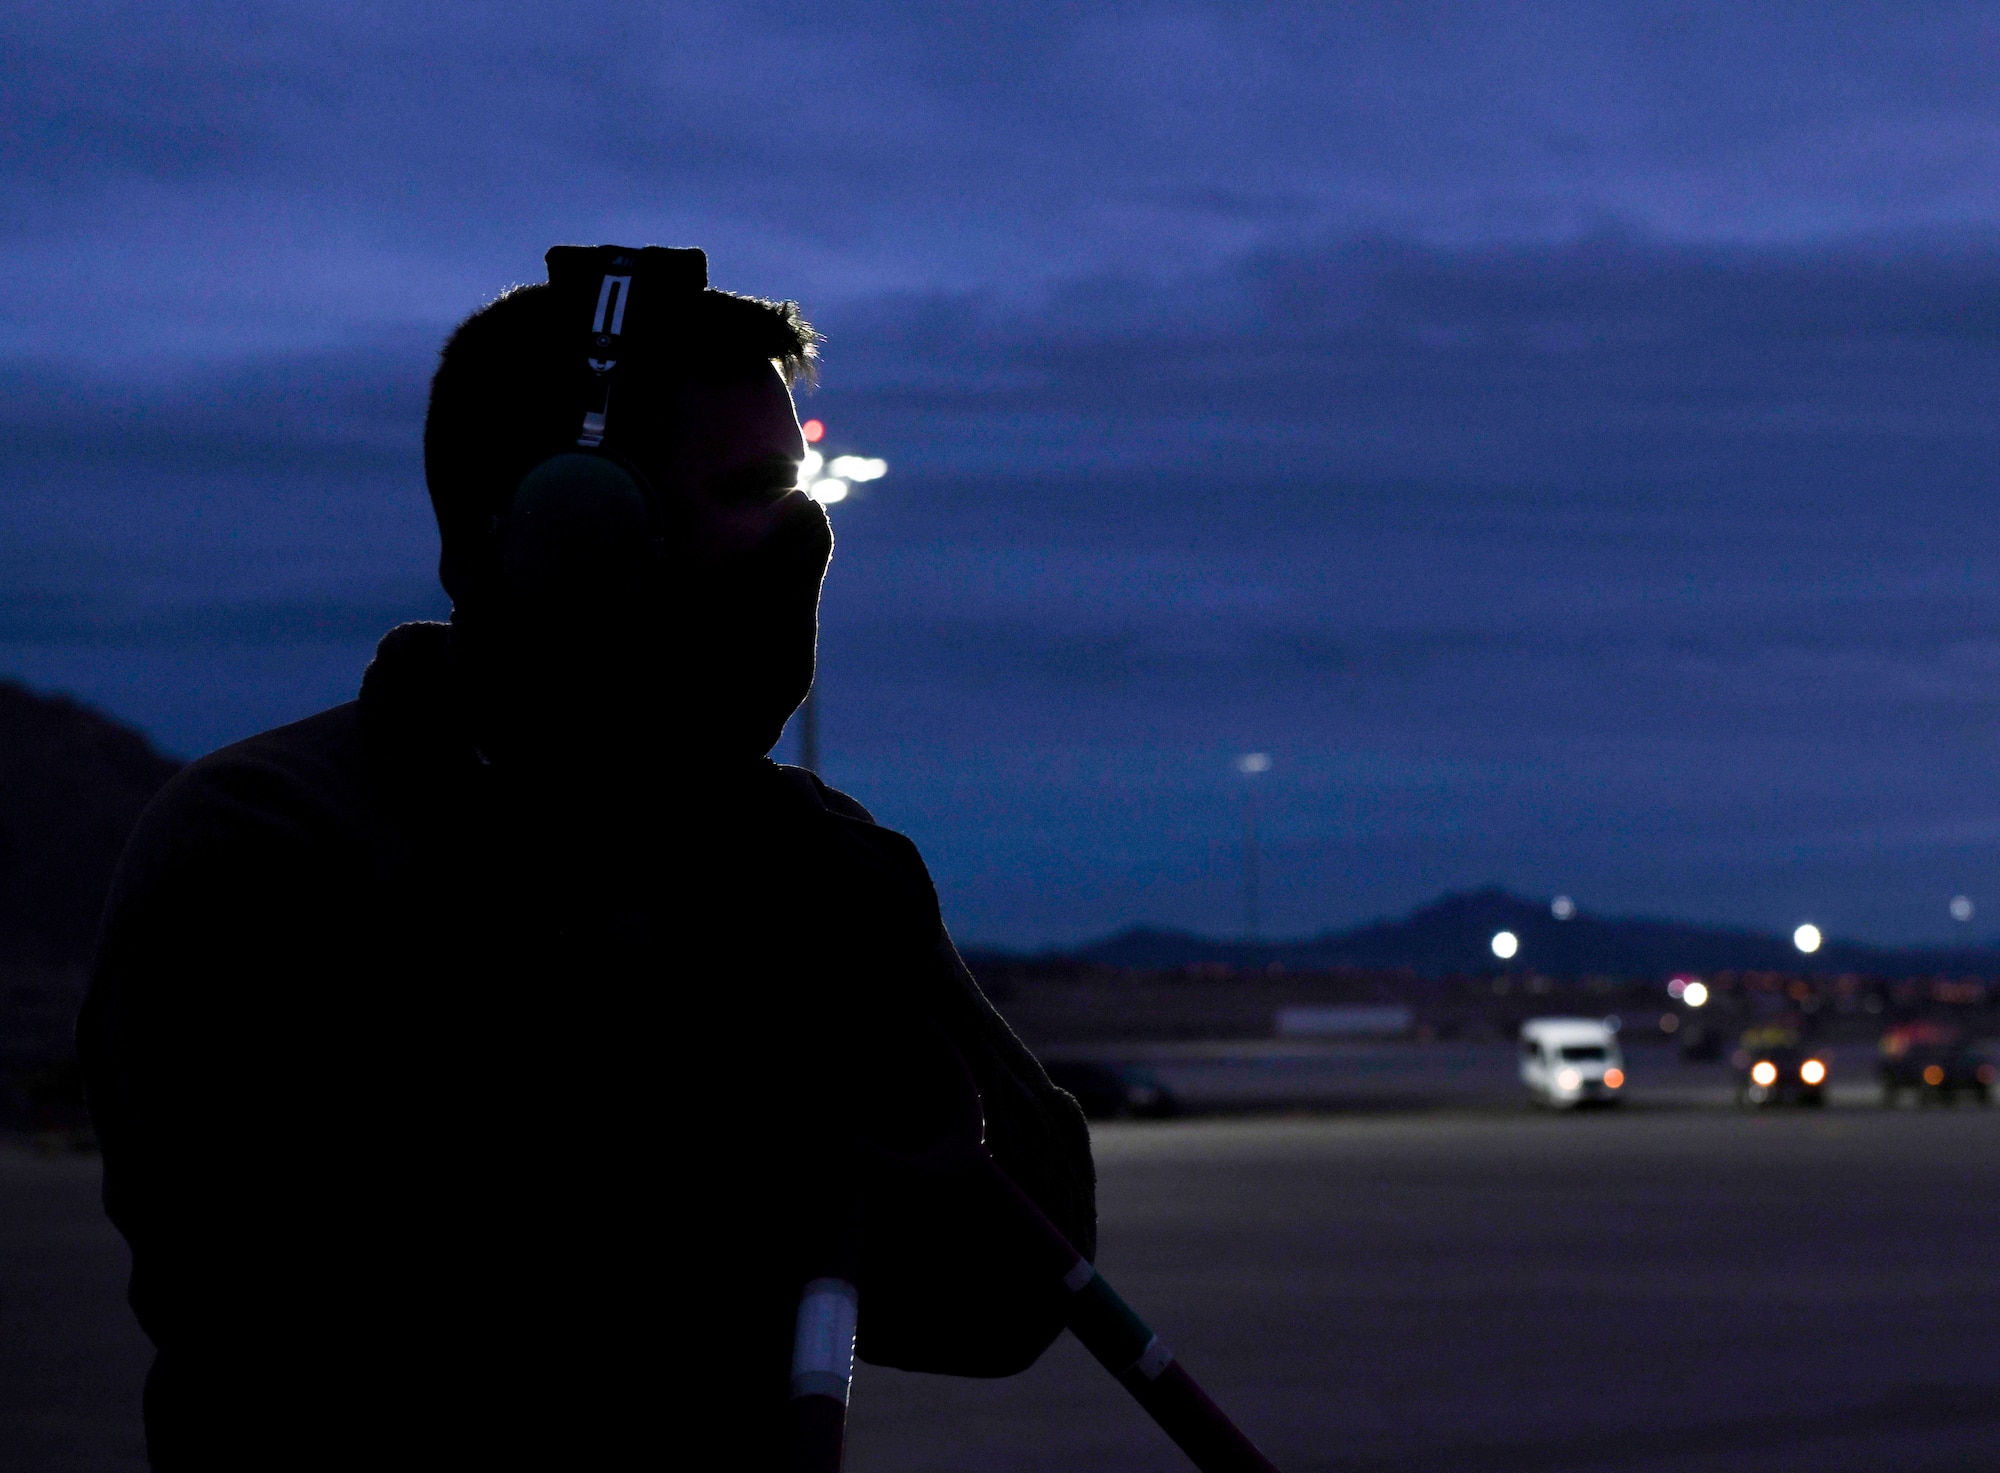 U.S. Air National Guard Staff Sgt. James Whitney, 131st Maintenance Squadron crew chief, waits to start a B-2 Spirit Stealth Bomber post-flight check during Red Flag 21-1, at Nellis Air Force Base, Nevada, Feb. 1, 2021. In order to ensure Team Whiteman always upholds its global deterrence responsibility, Red Flag challenged Airmen to operate in a limited environment to better enhance their readiness and ensure mission success. Aircrews rotated their mission duties throughout the large-force exercise, expanding their ability to plan and execute operations best fit for various contingency scenarios. (U.S. Air Force photo by Staff Sgt. Sadie Colbert)